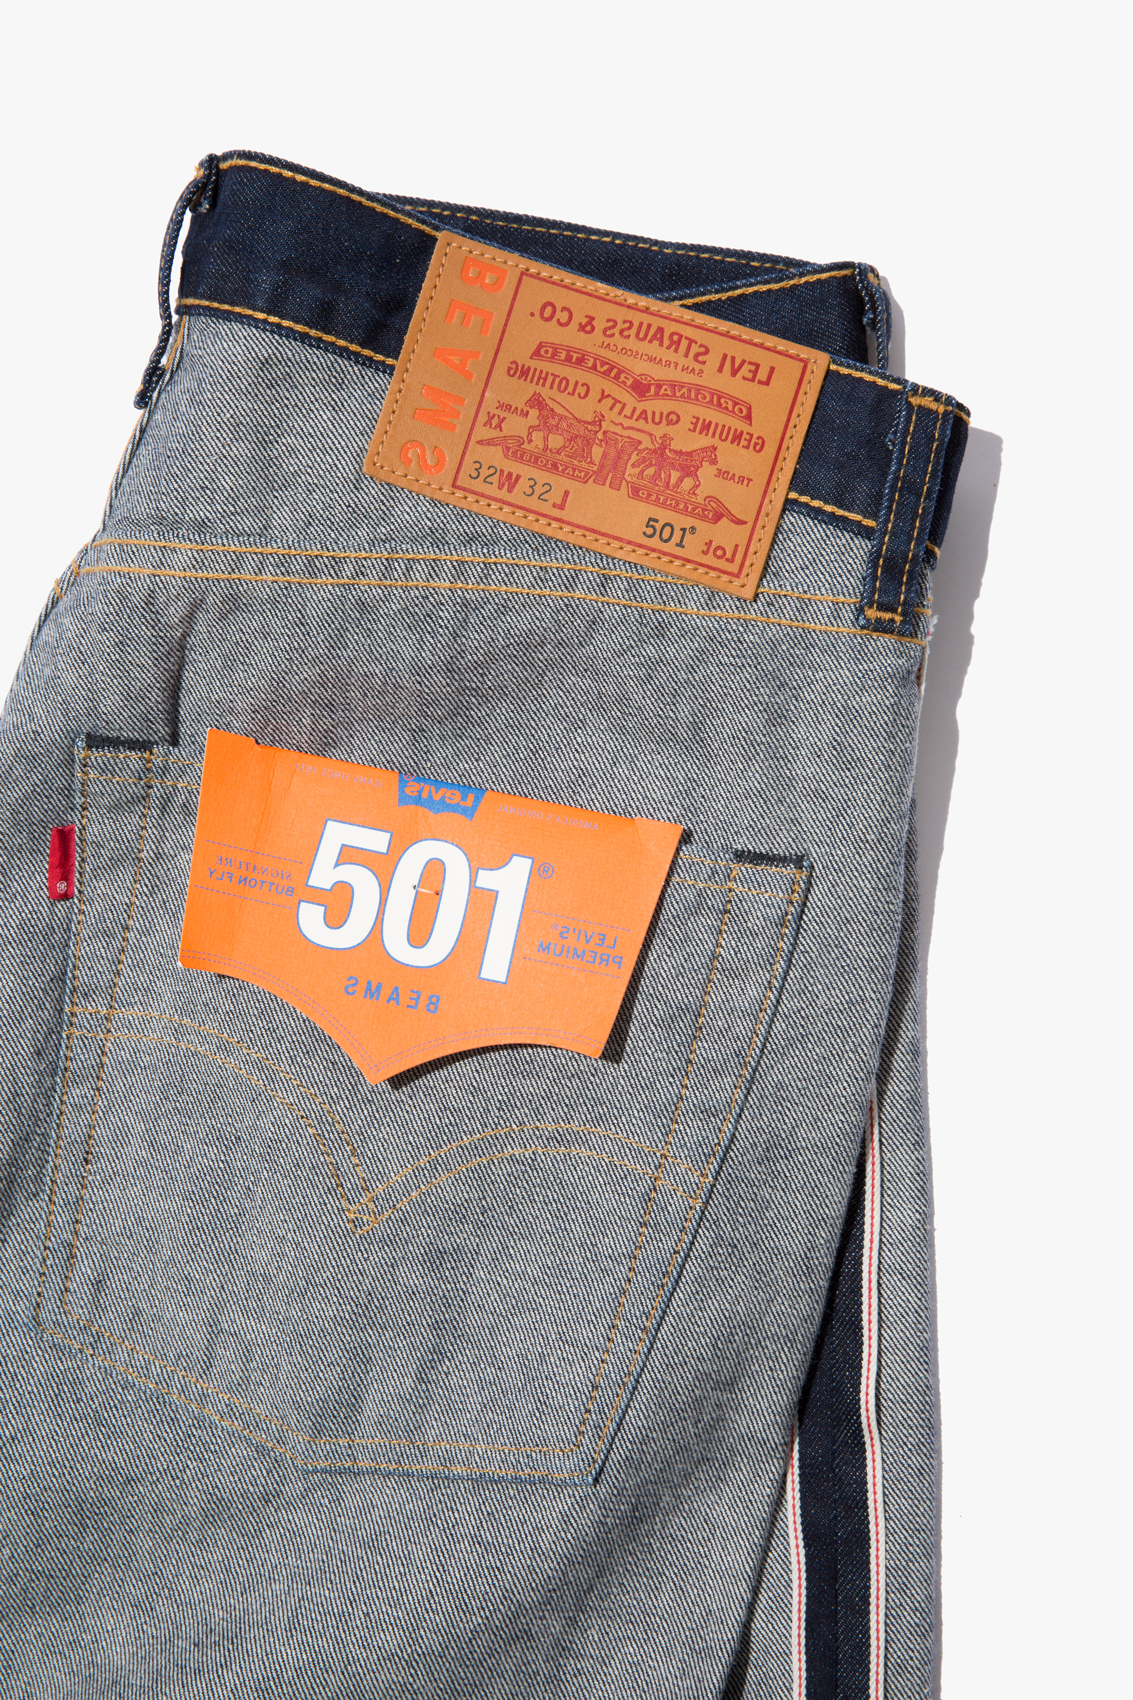 BEAMS LEVI'S INSIDE OUT SELVEDGE 501